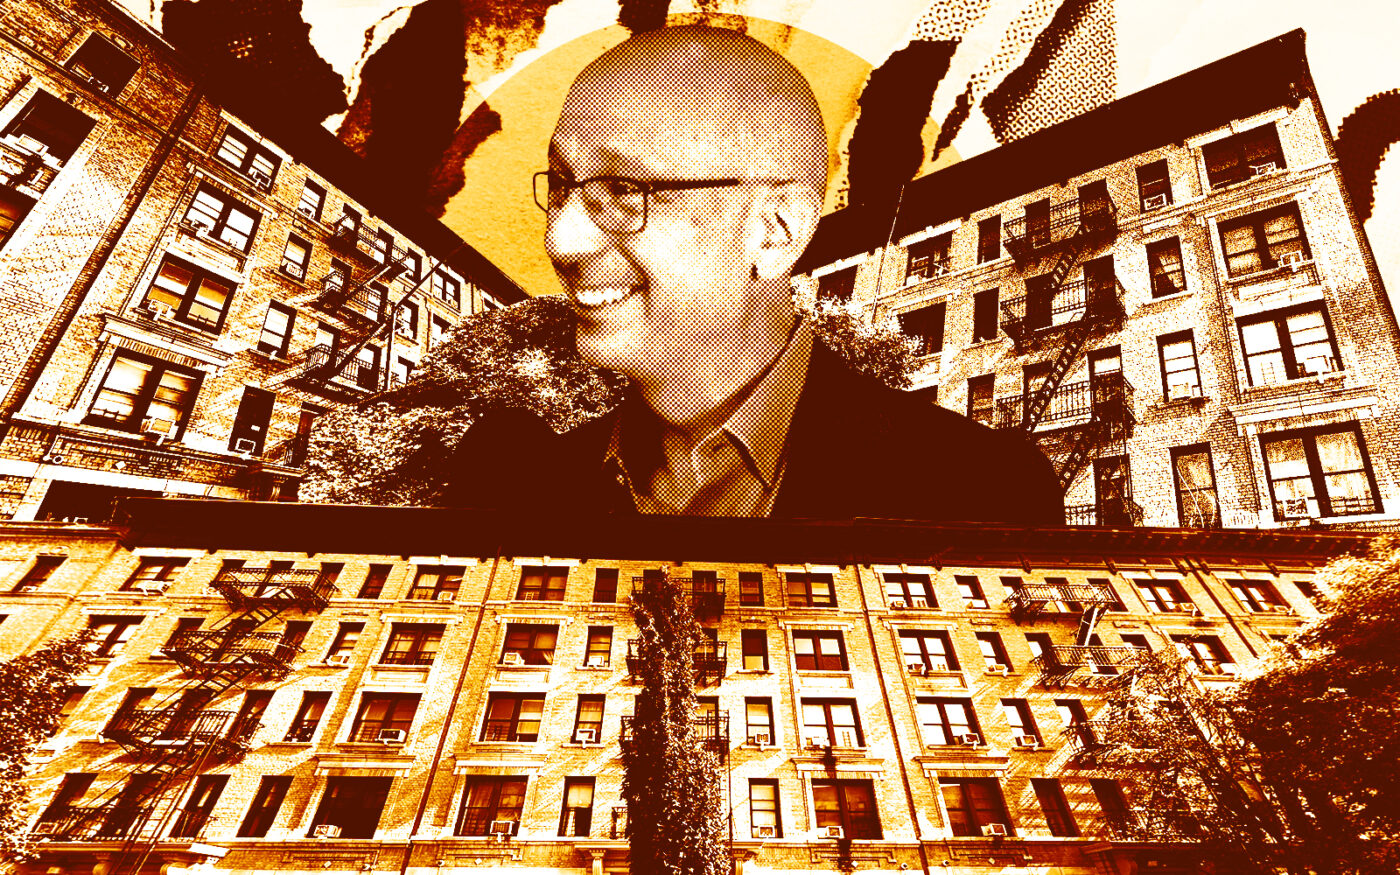 Rent-stabilized Landlord Sells Portfolio At 44% Discount